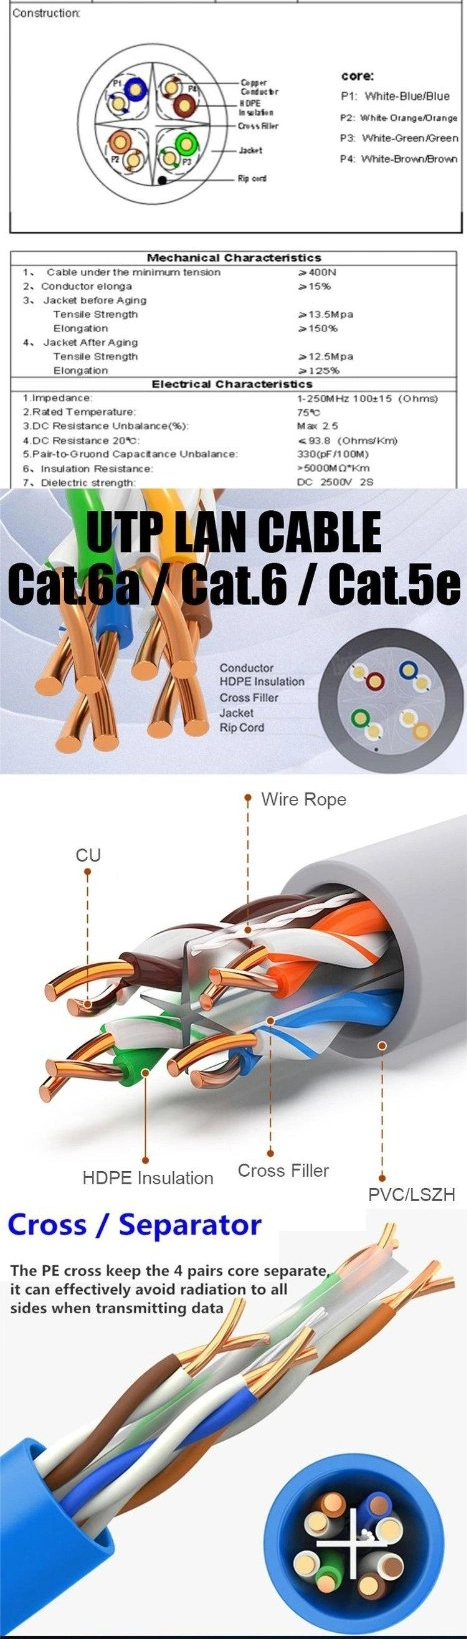 Gcabling UTP LAN Cat5e CAT6 CAT6A Computer Communication Cable Twisted 4pair Copper Solid Wire Indoor Data CAT6 Ethernet Network Cable